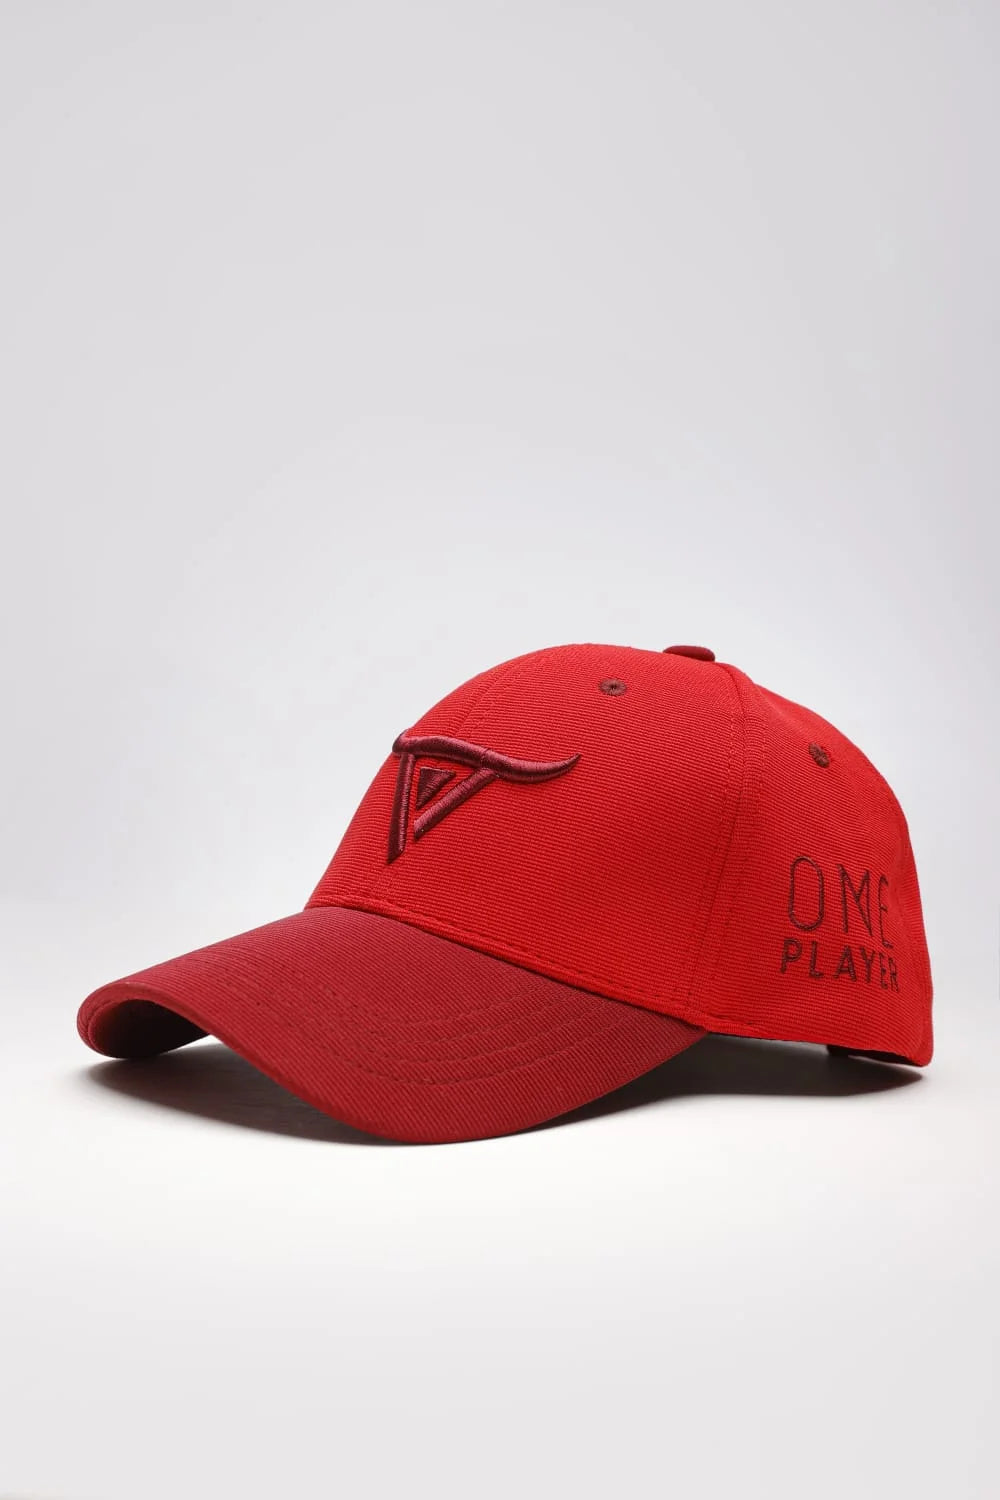 Unisex Red solid baseball cap, has a visor by One Player